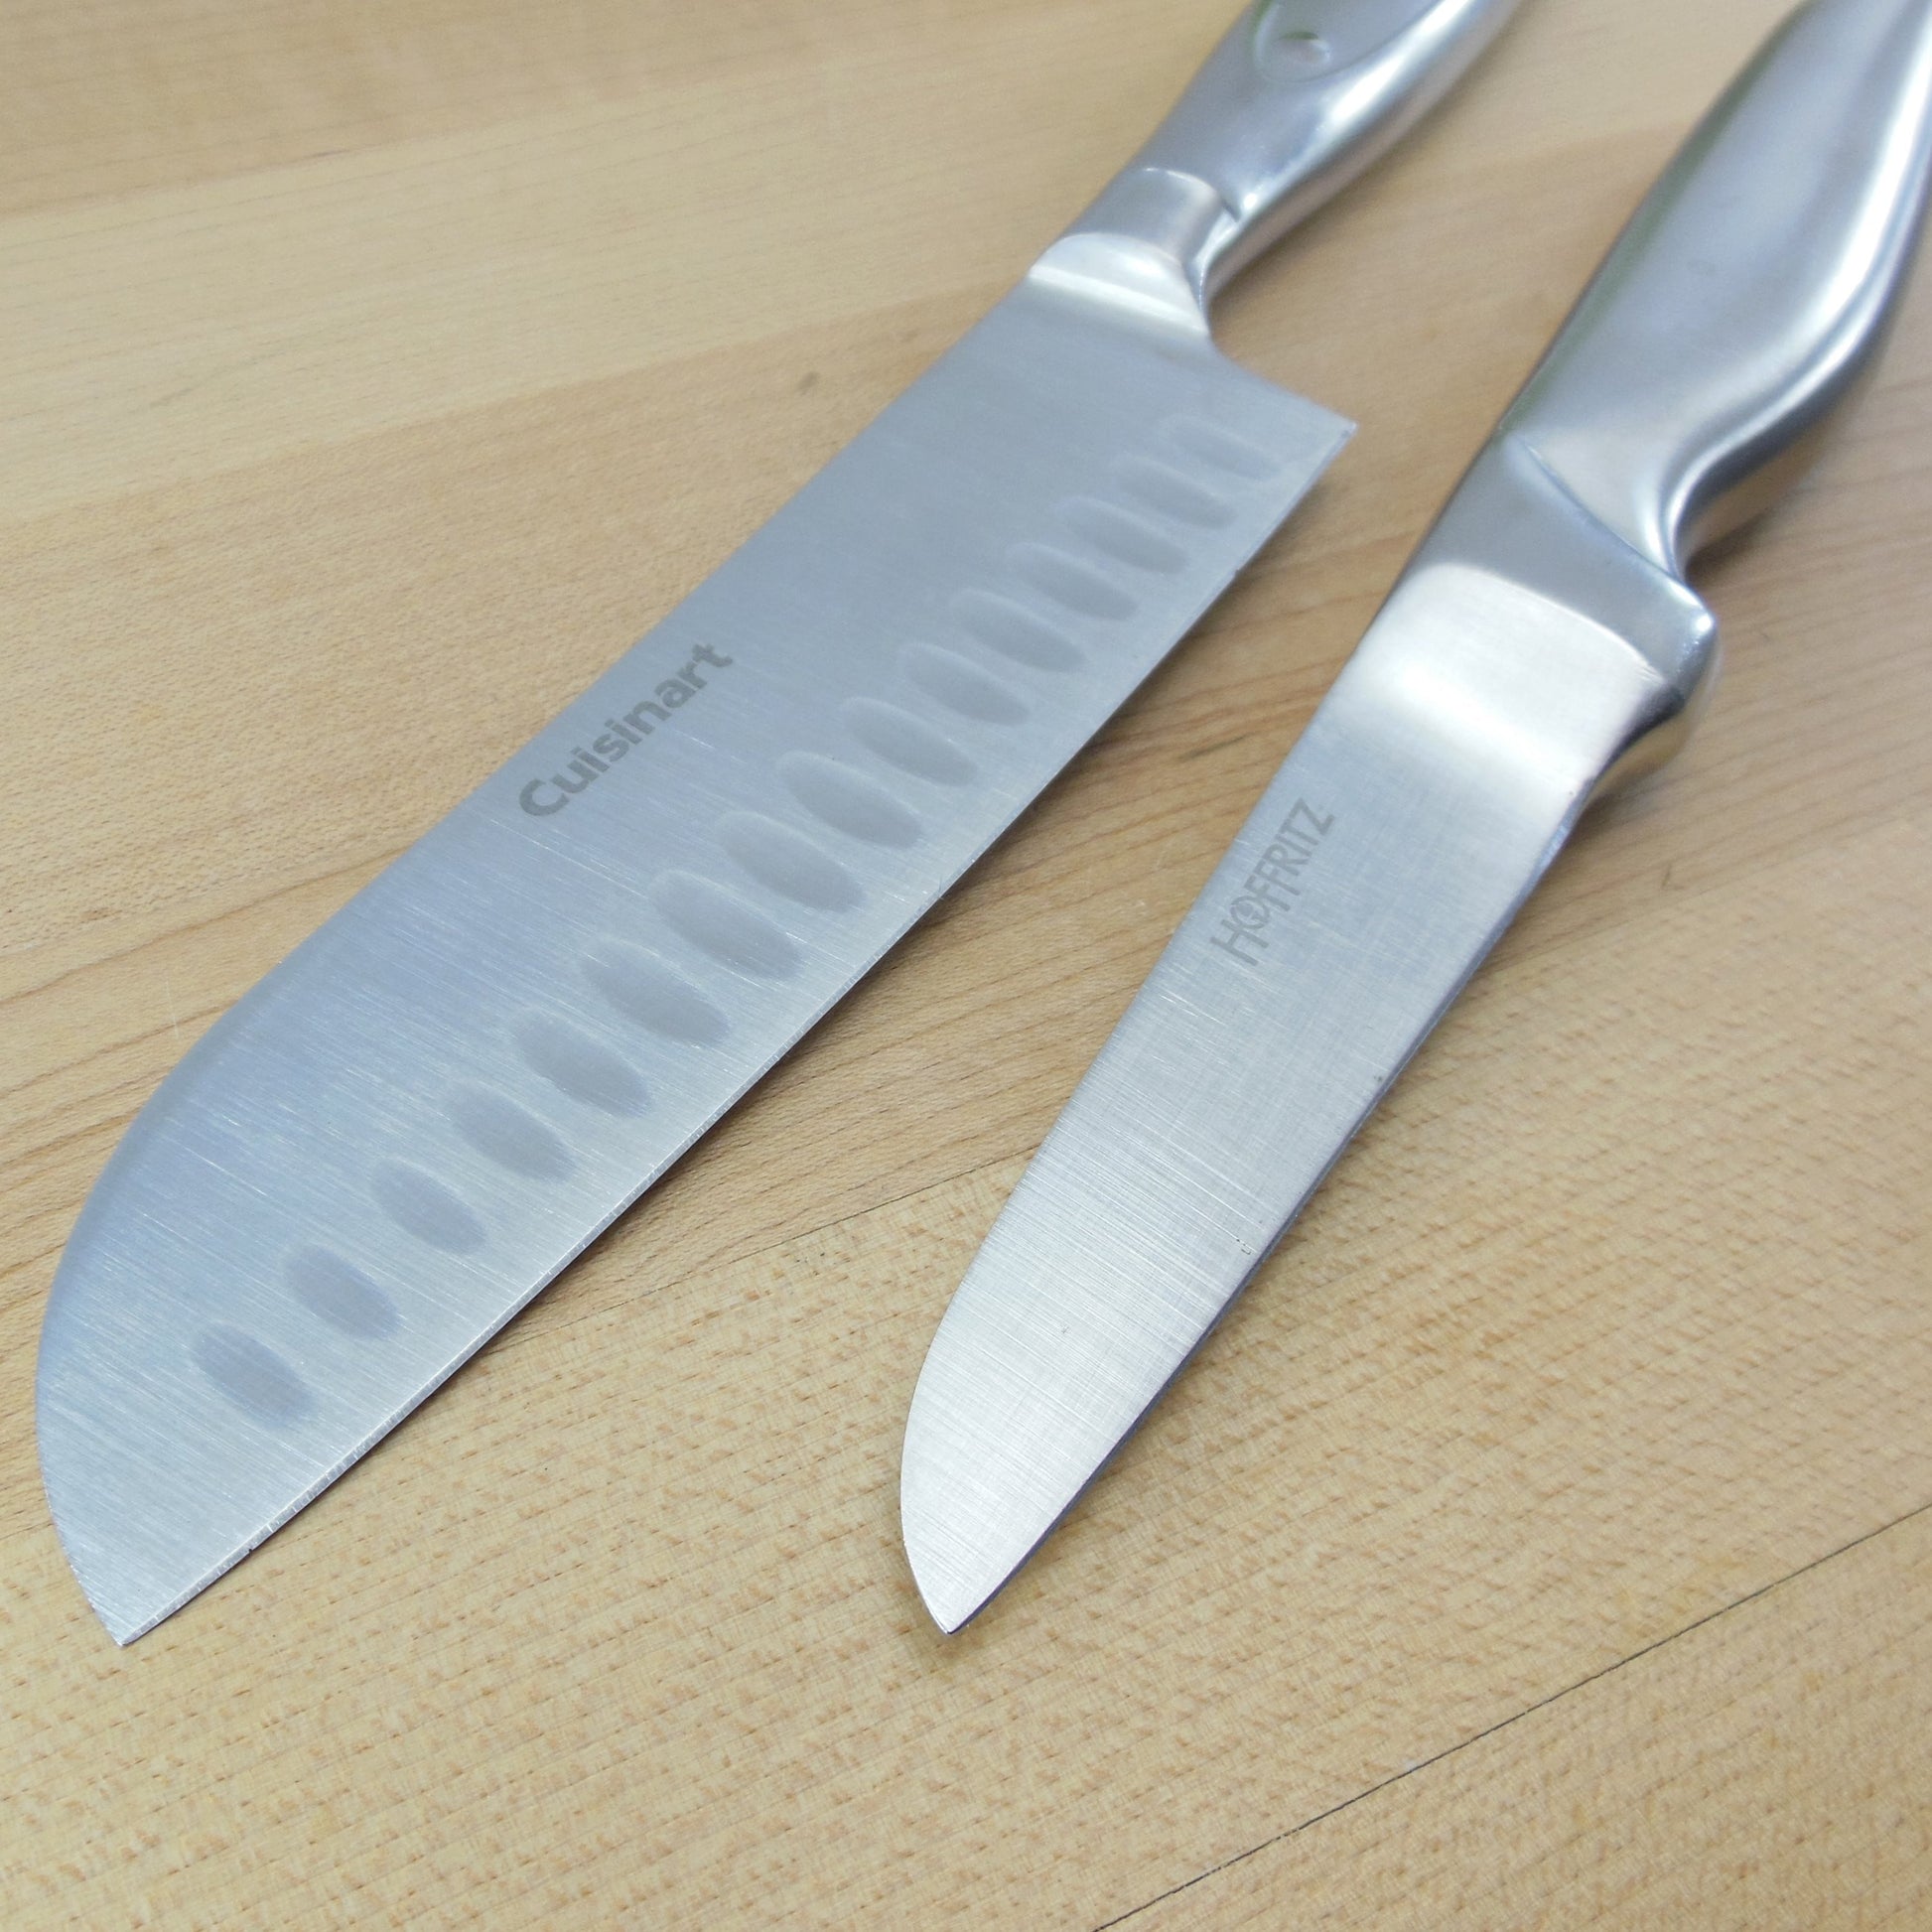 Cuisinart 5" Santoku or Hoffritz 3" Paring Knife Stainless Handles - Your Choice used